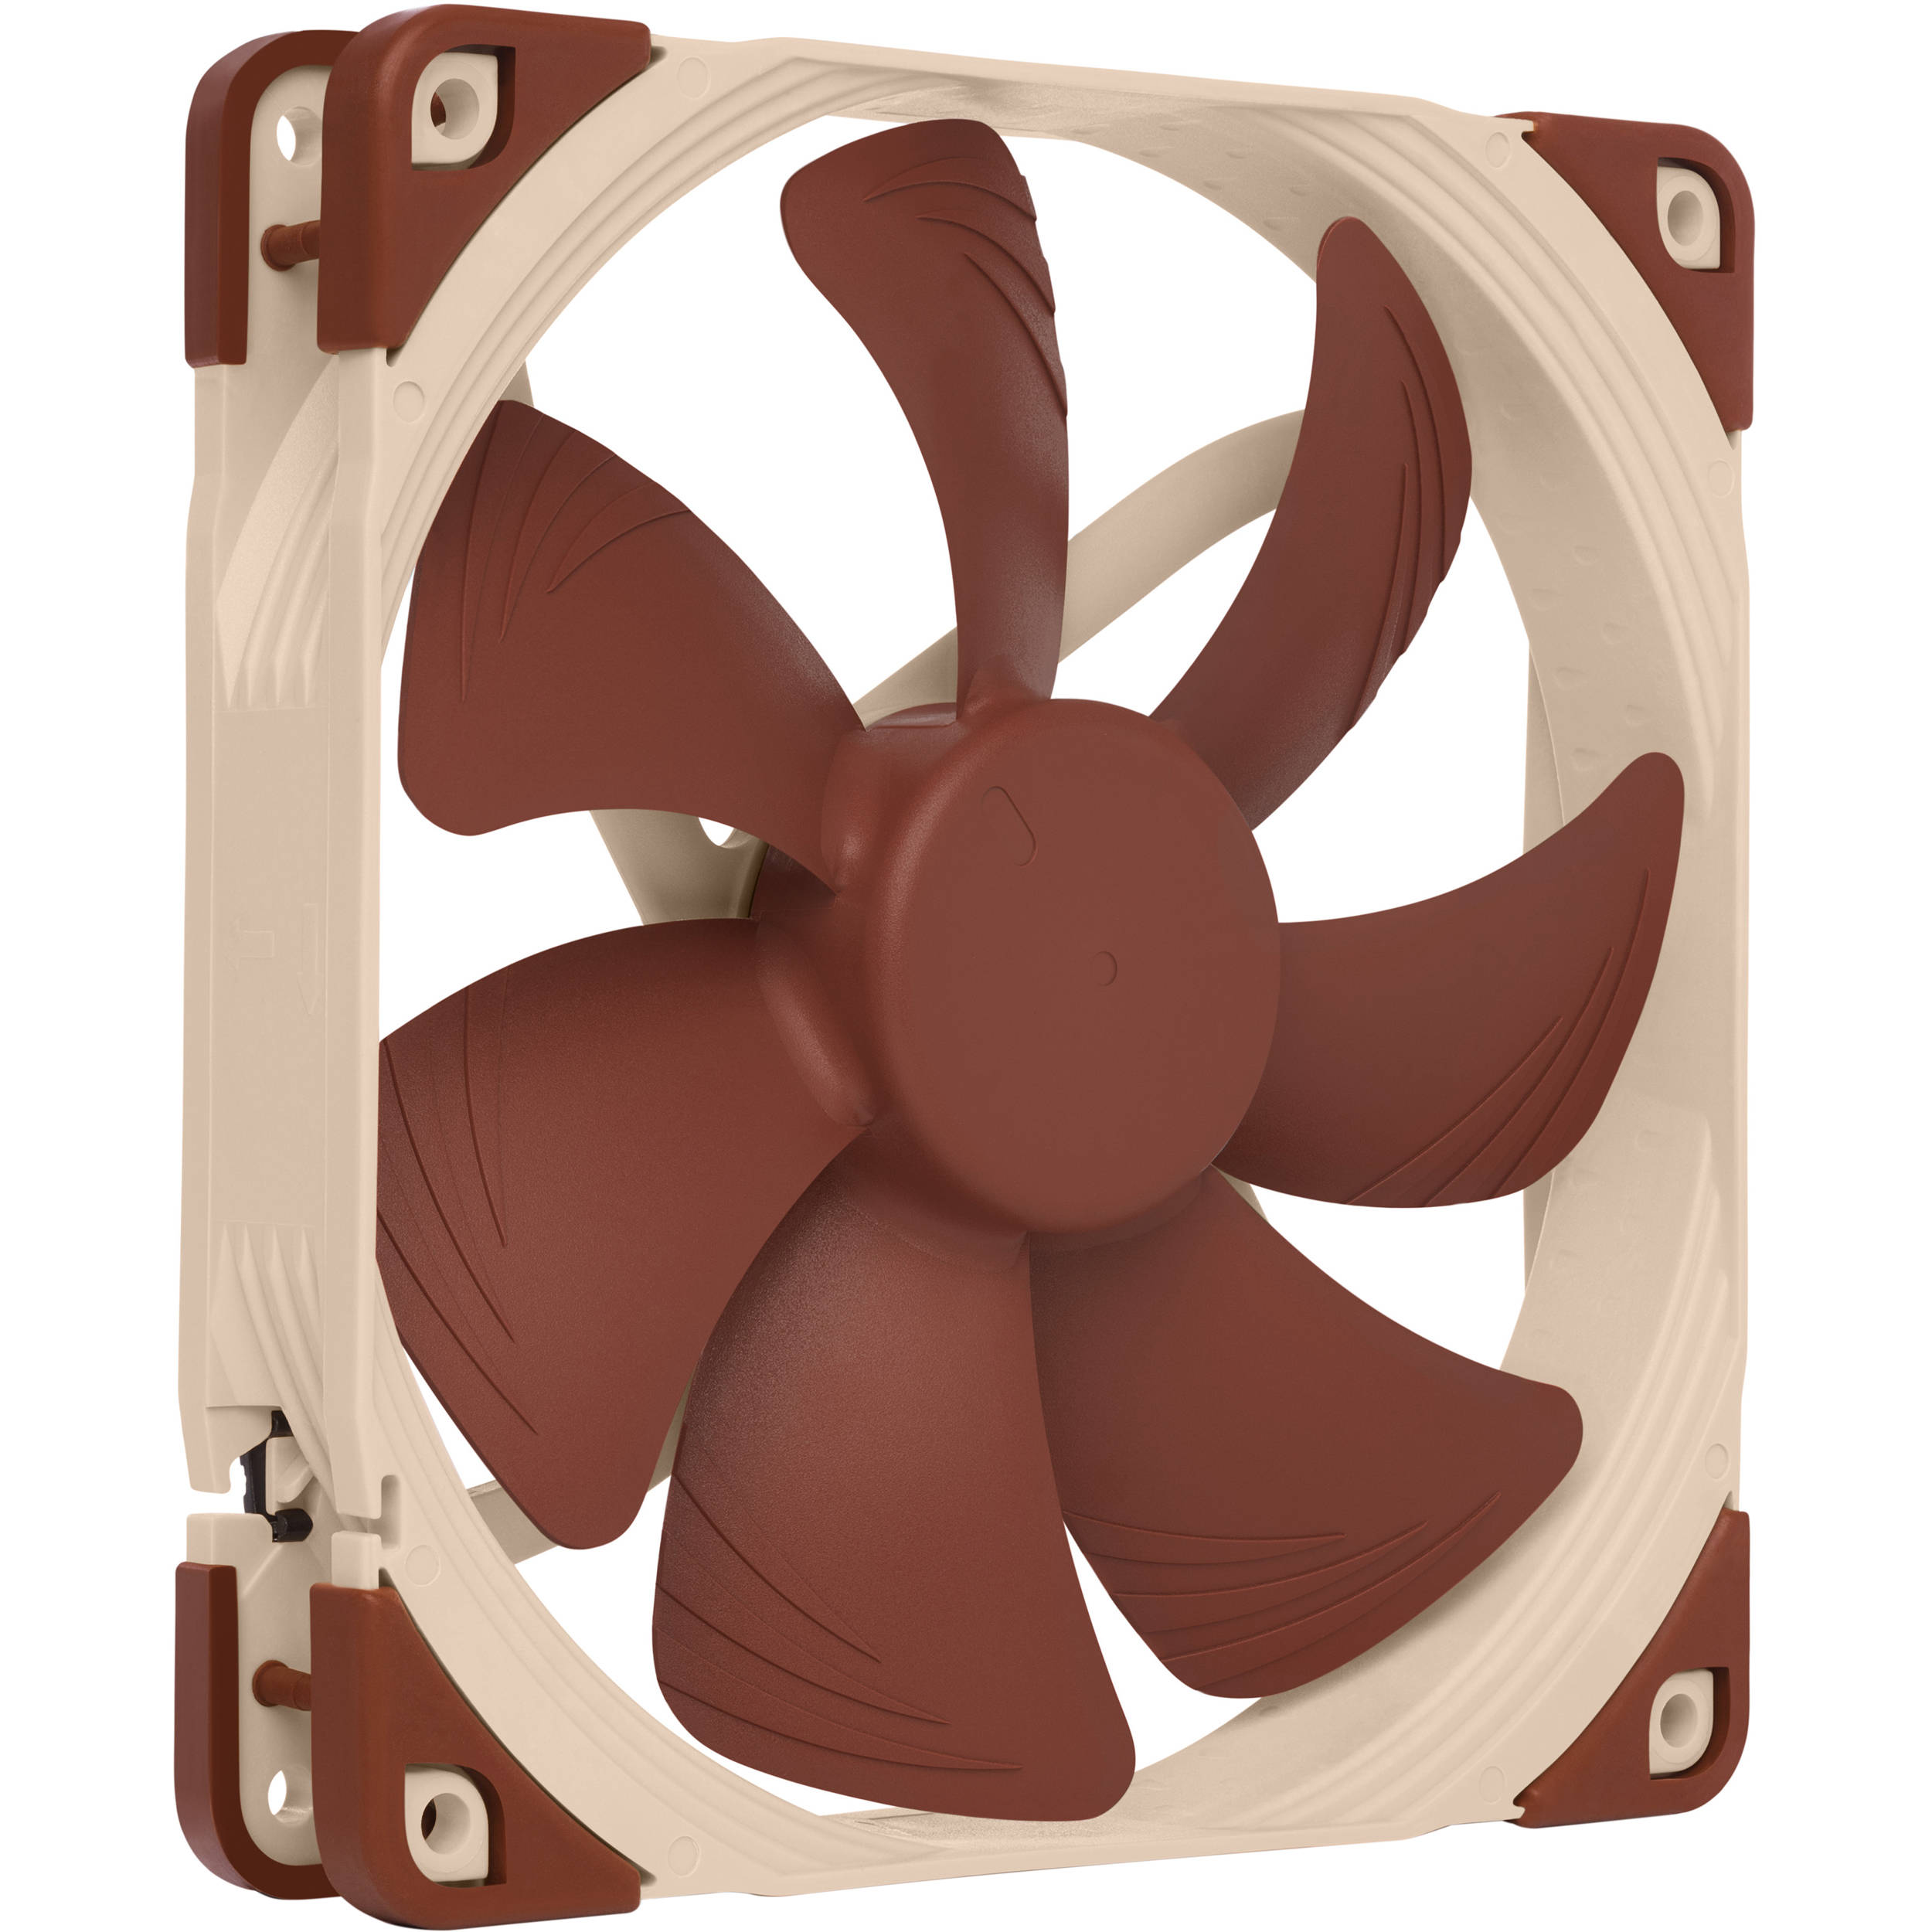 Noctua NF-A14 PWM 140mm Cooling Fan (Square Frame, Brown)